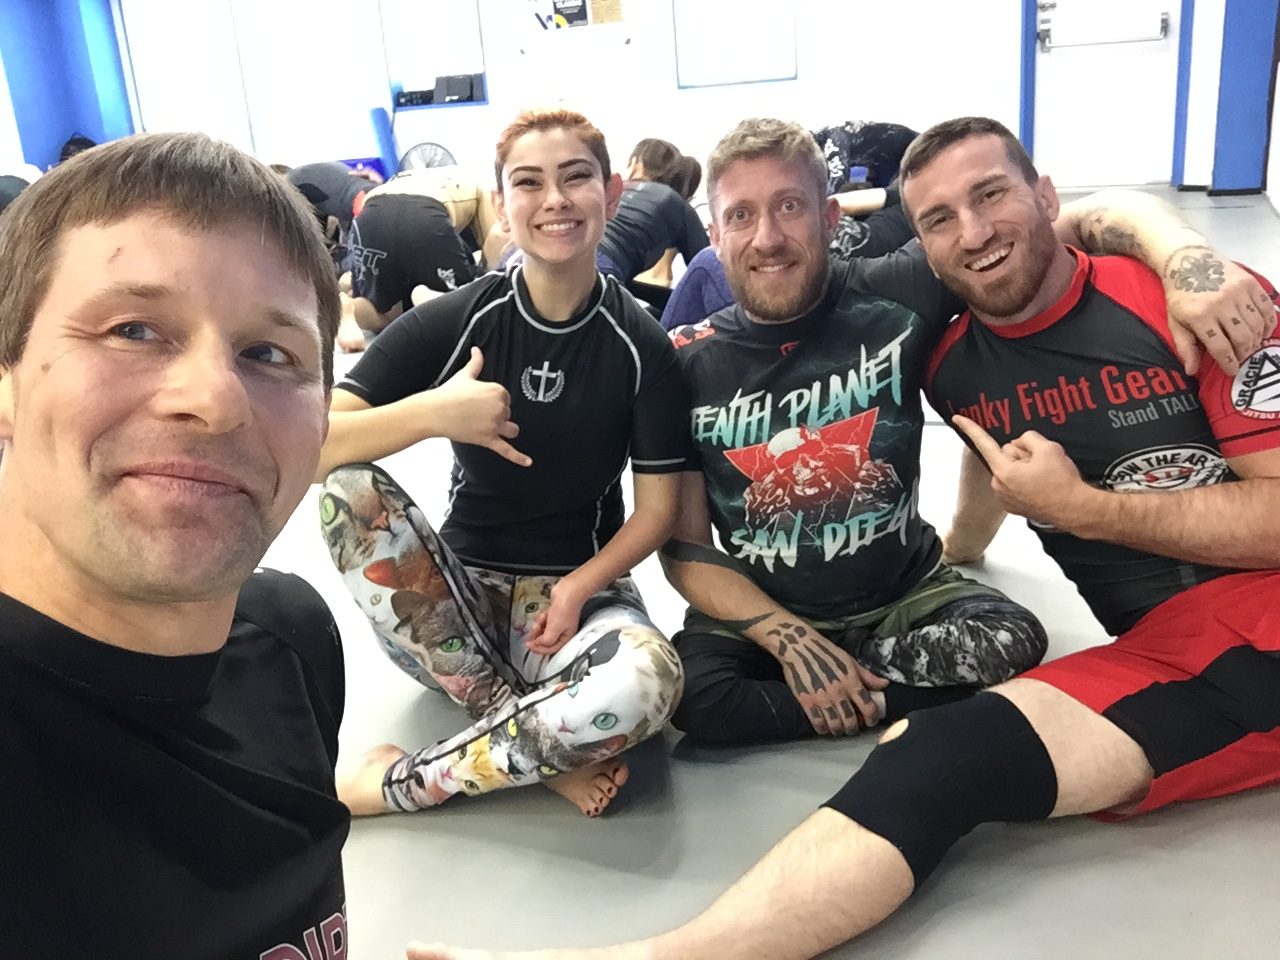 What Do I Need To Know If I’m An Adaptive Athlete Interested in BJJ?